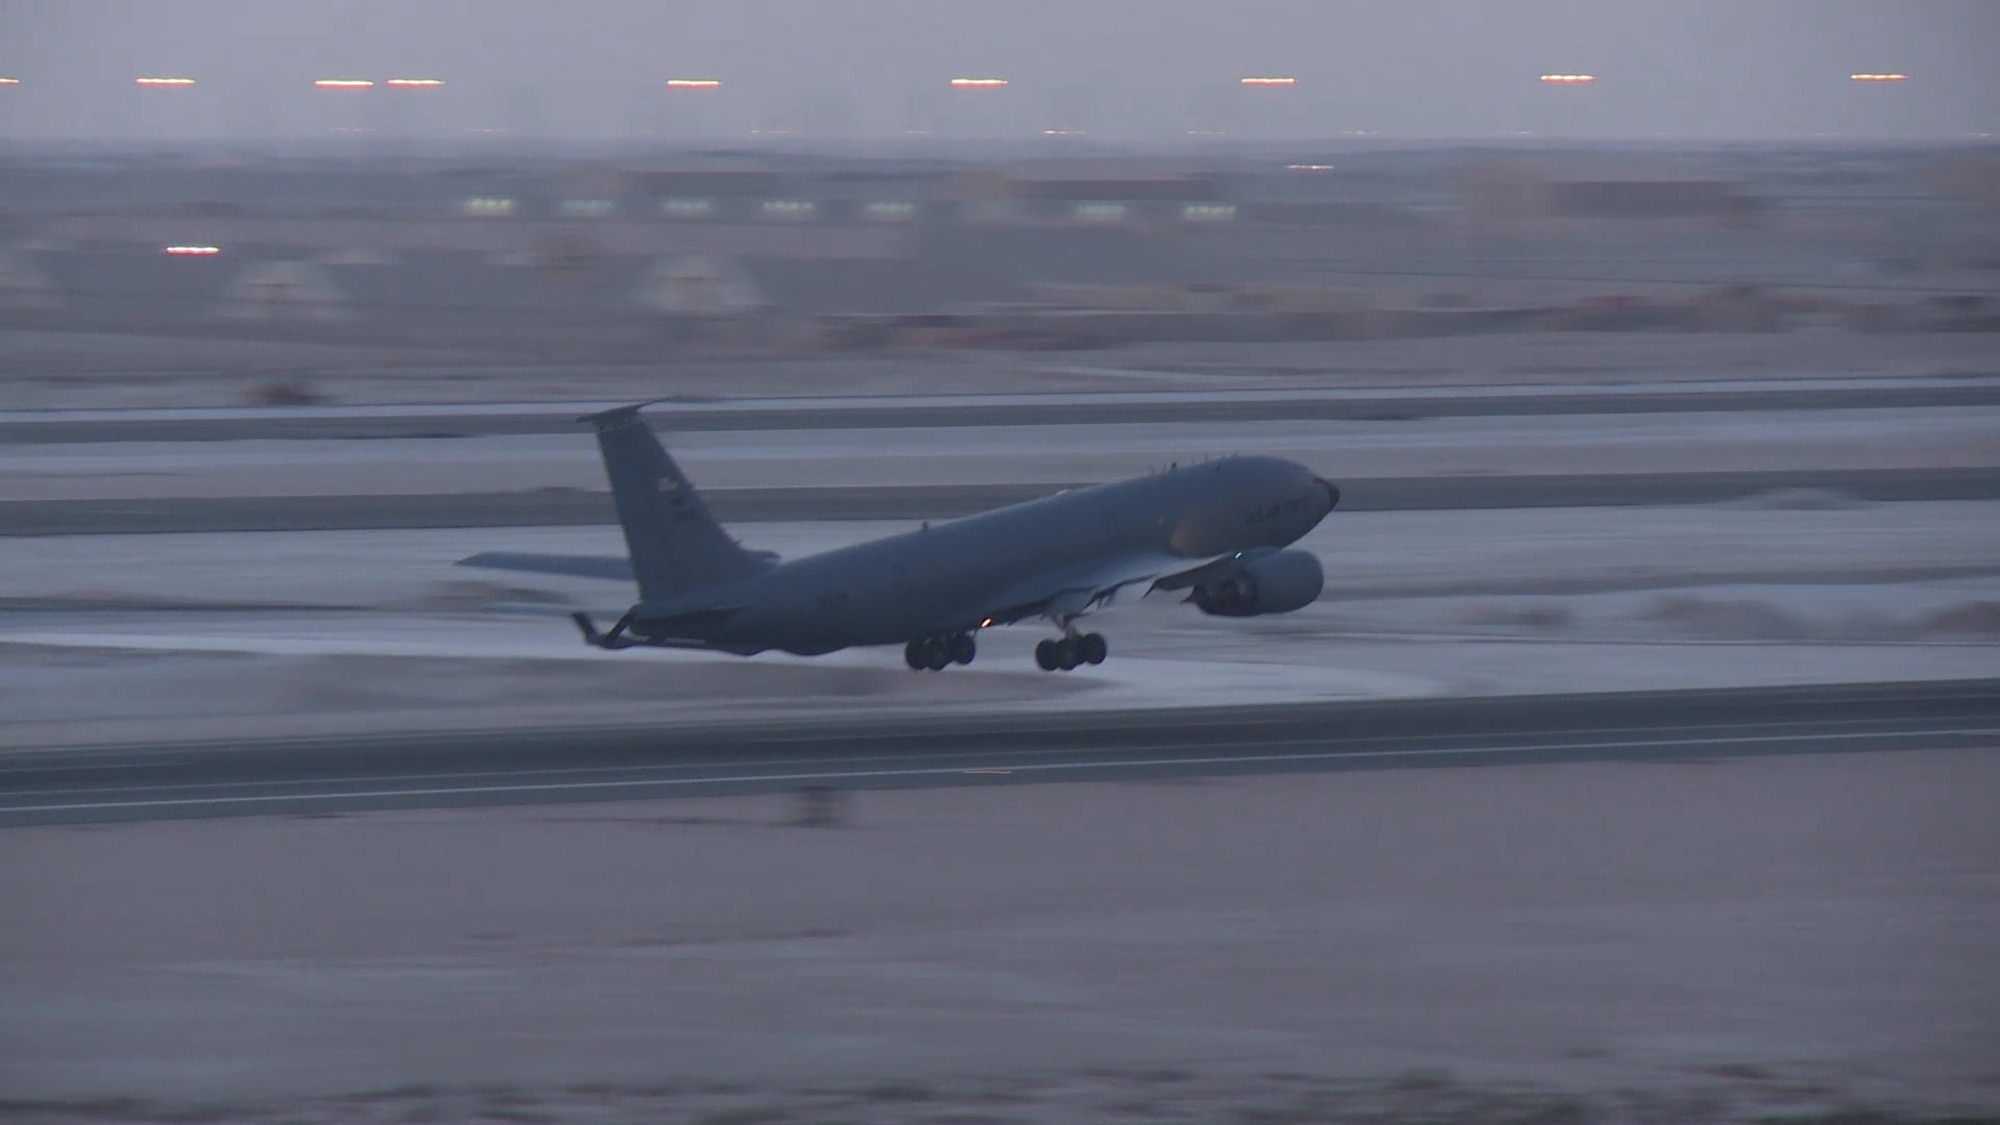 A KC-135 Stratotanker takes off from the flightline Dec. 31, 2014, at Al Udeid Air Base, Qatar. The 340th Expeditionary Air Refueling Squadron here surpassed a major milestone with their Roll-On Beyond Line of Sight Enhancement data link system when the unit completed 40,000 flight hours while supporting combat missions in the U.S. Central Command area of operations. (U.S. Air Force photo by Staff Sgt. Mariko Frazee)